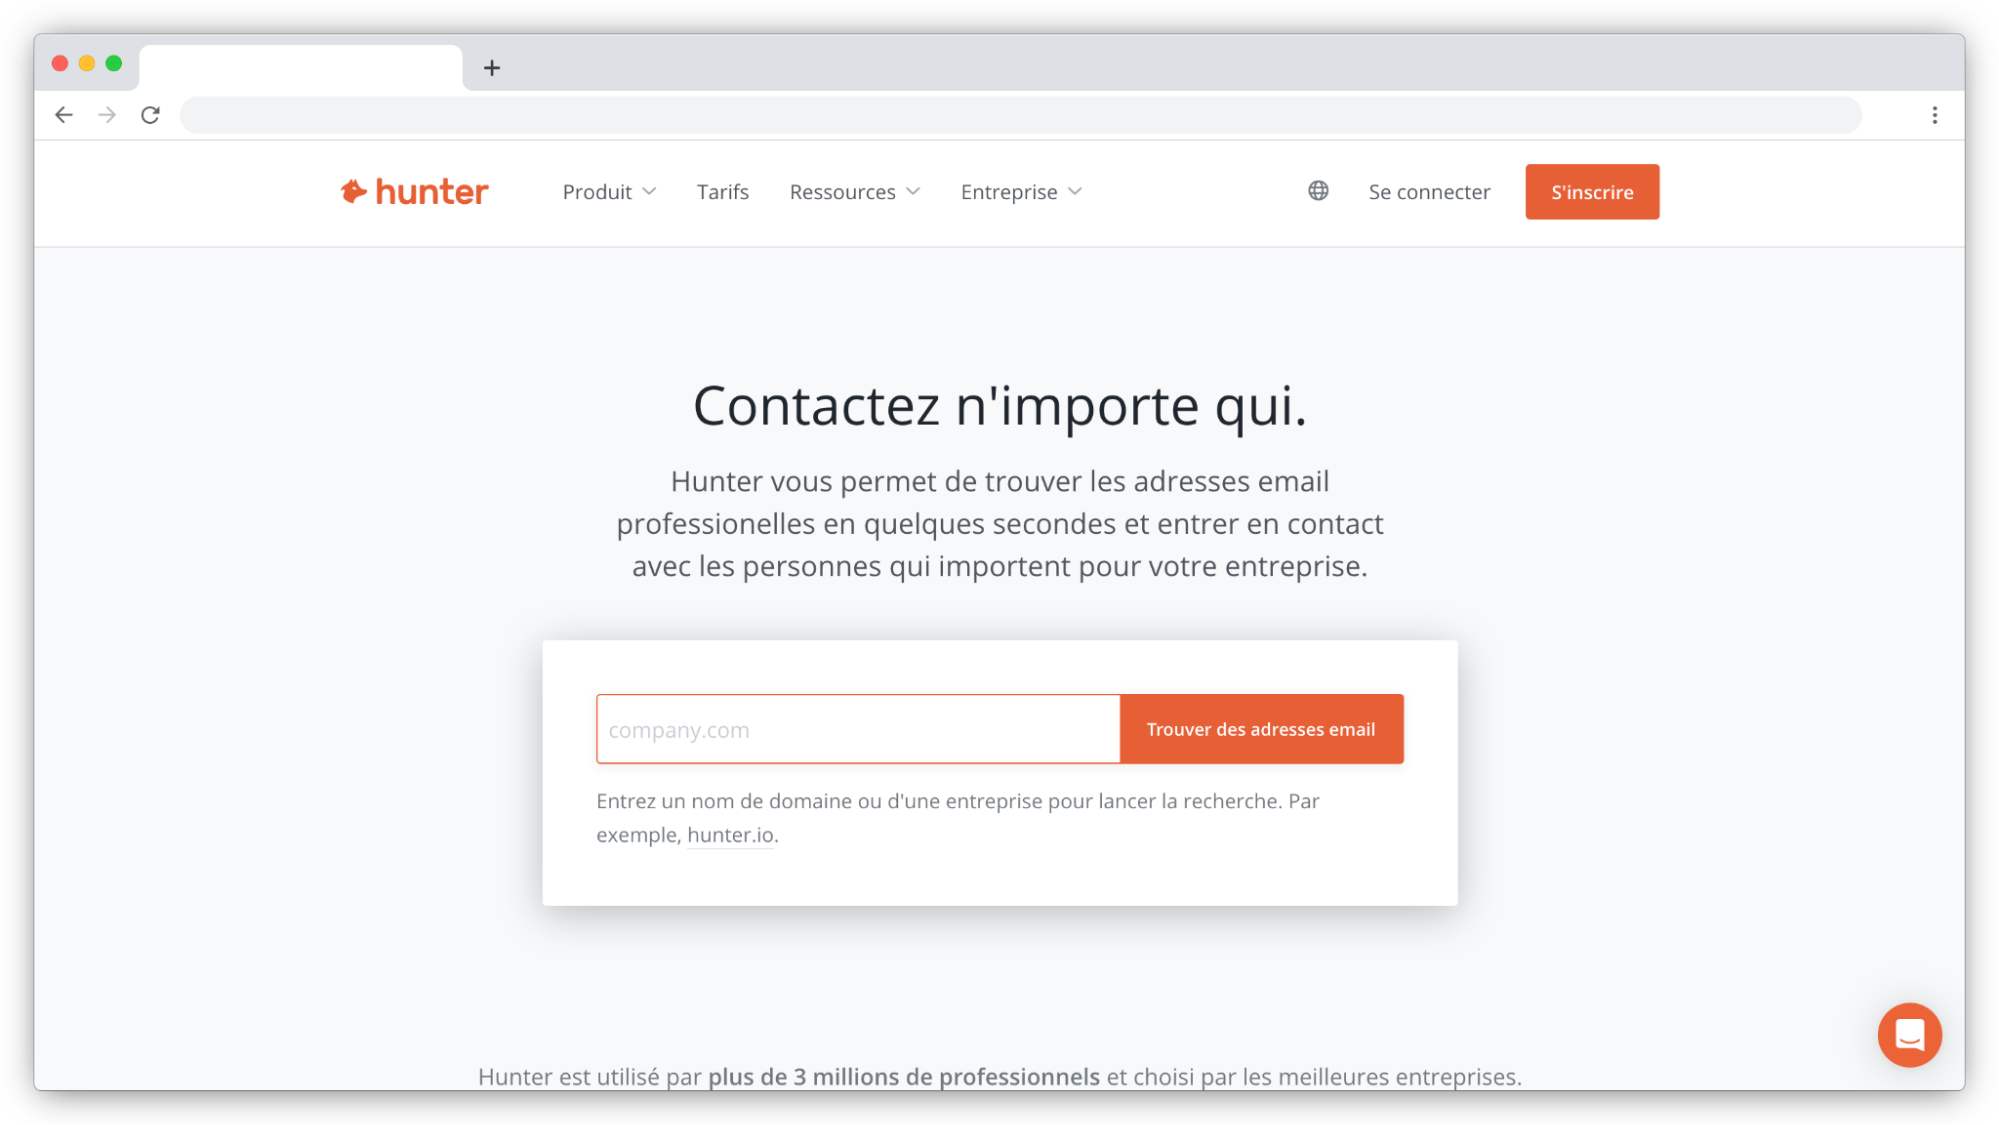 The Hunter website in French